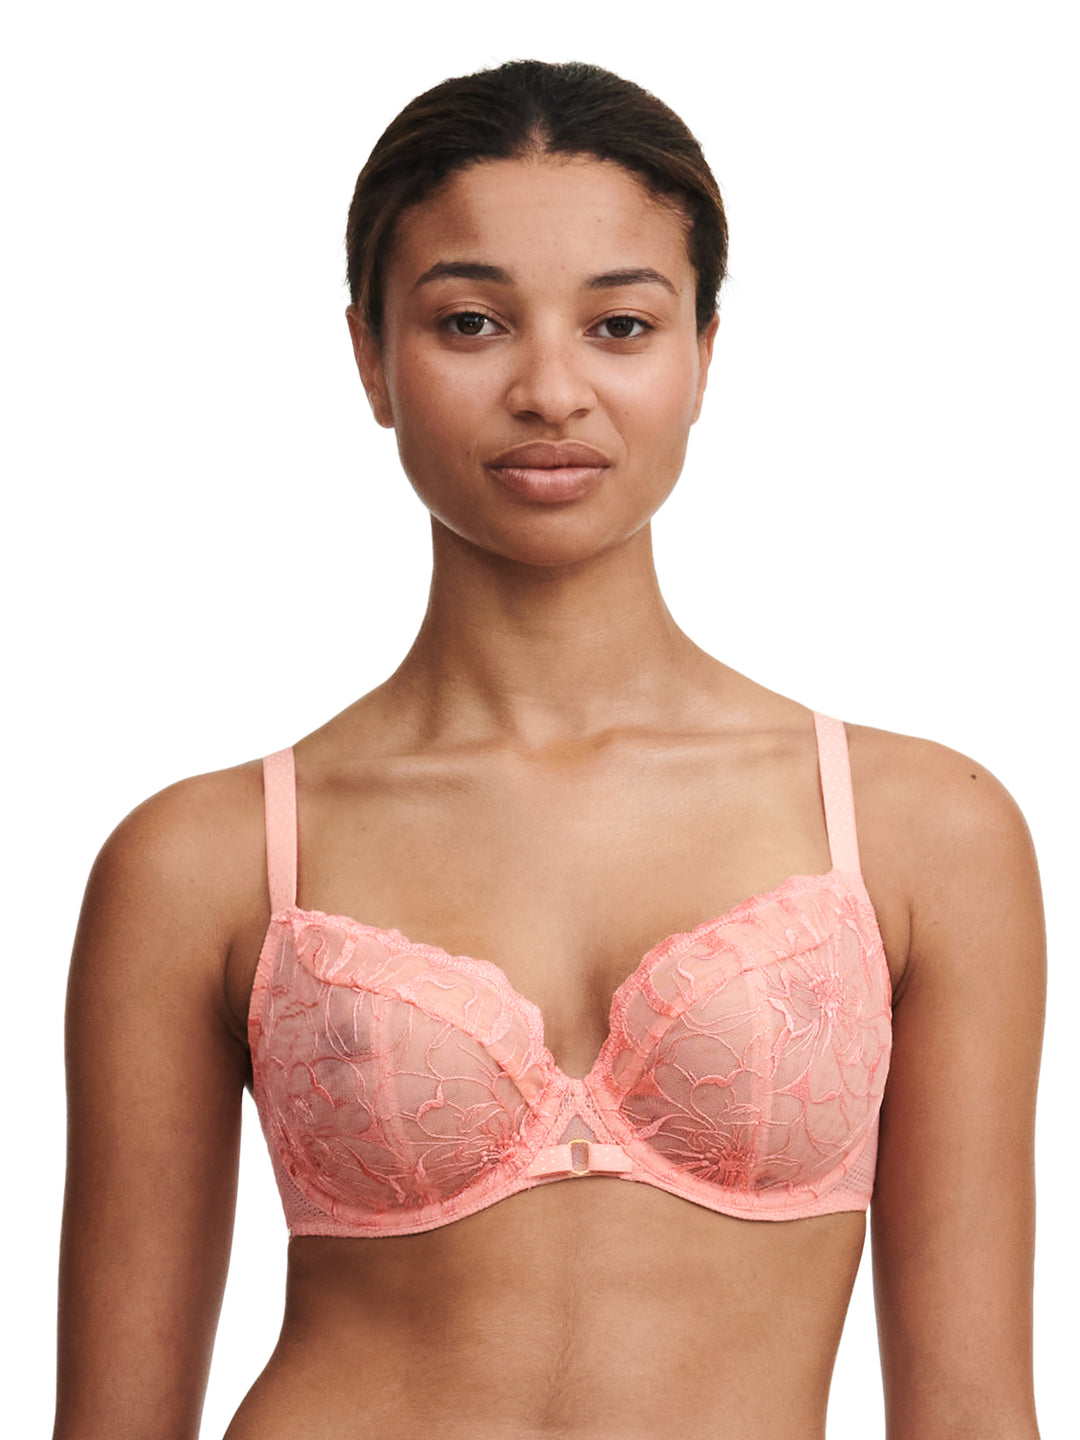 Chantelle - Fleurs Covering Underwired Bra Candlelight Peach